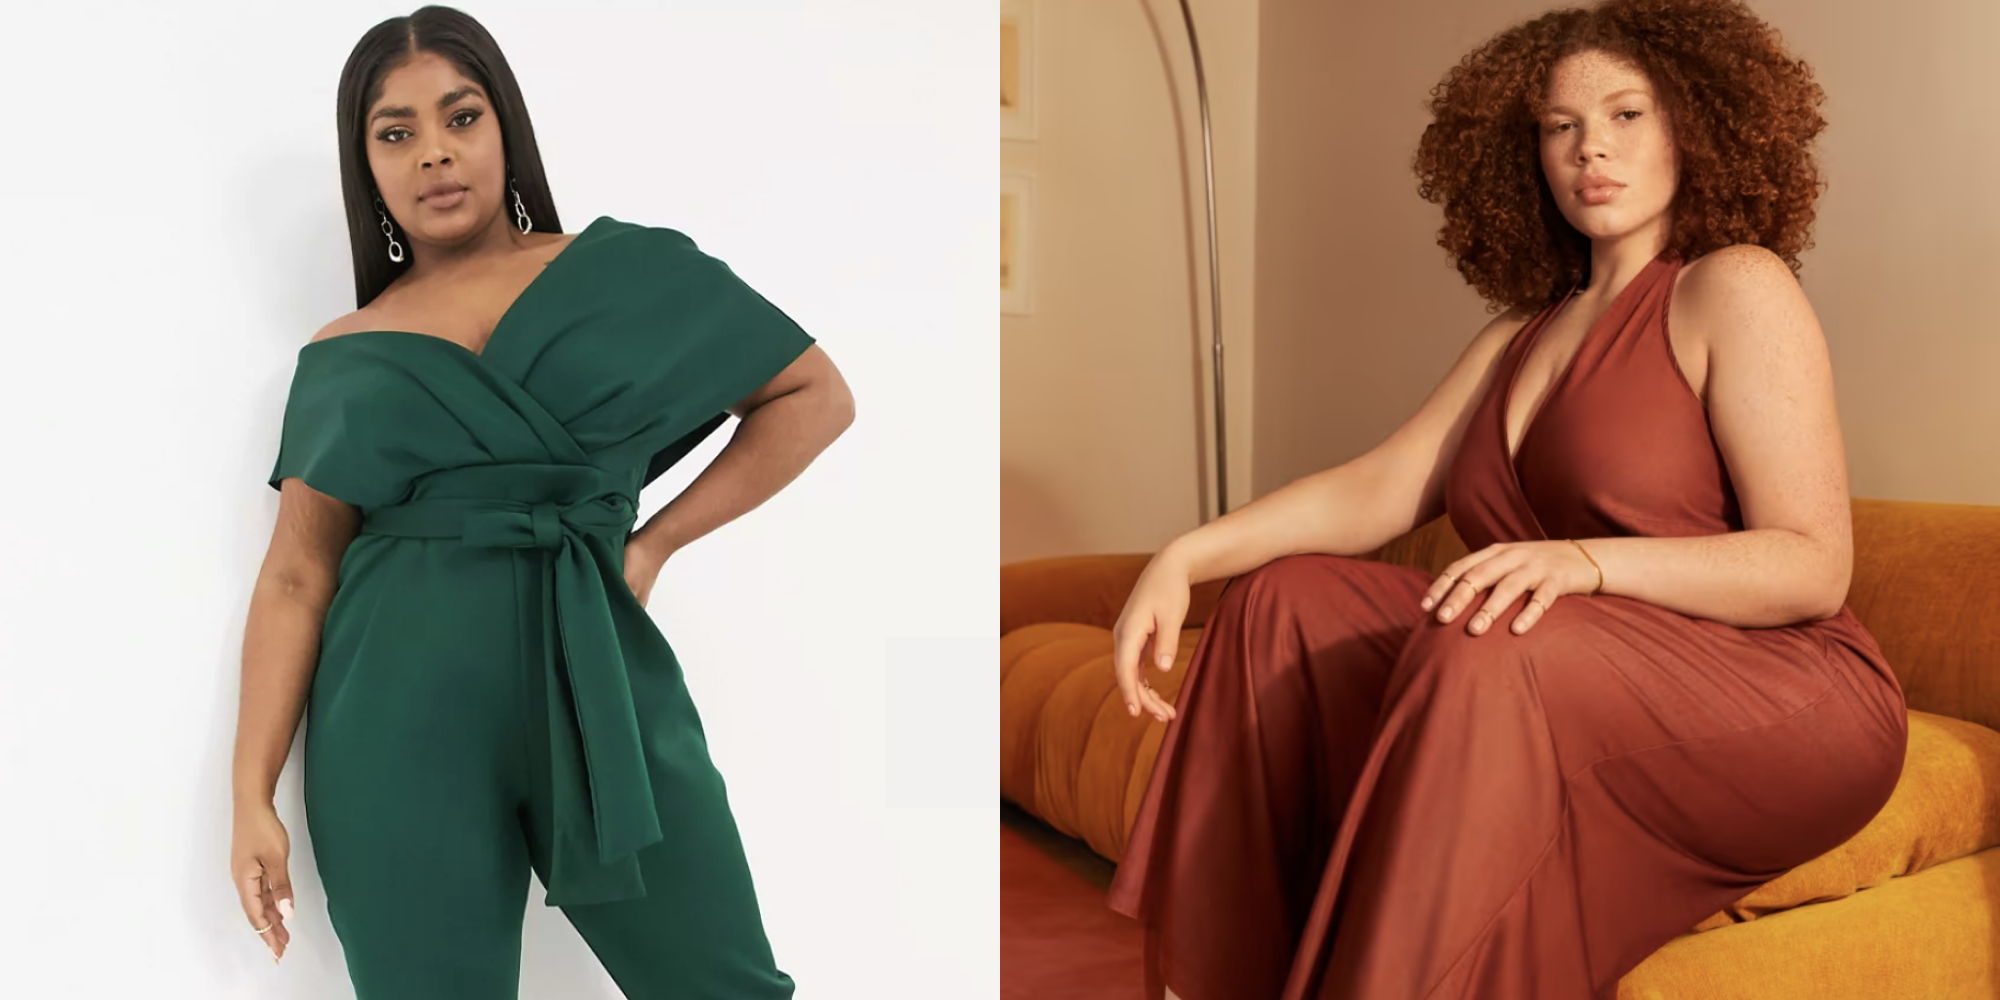 24 Best Plus-Size Jumpsuits for Fall 2022